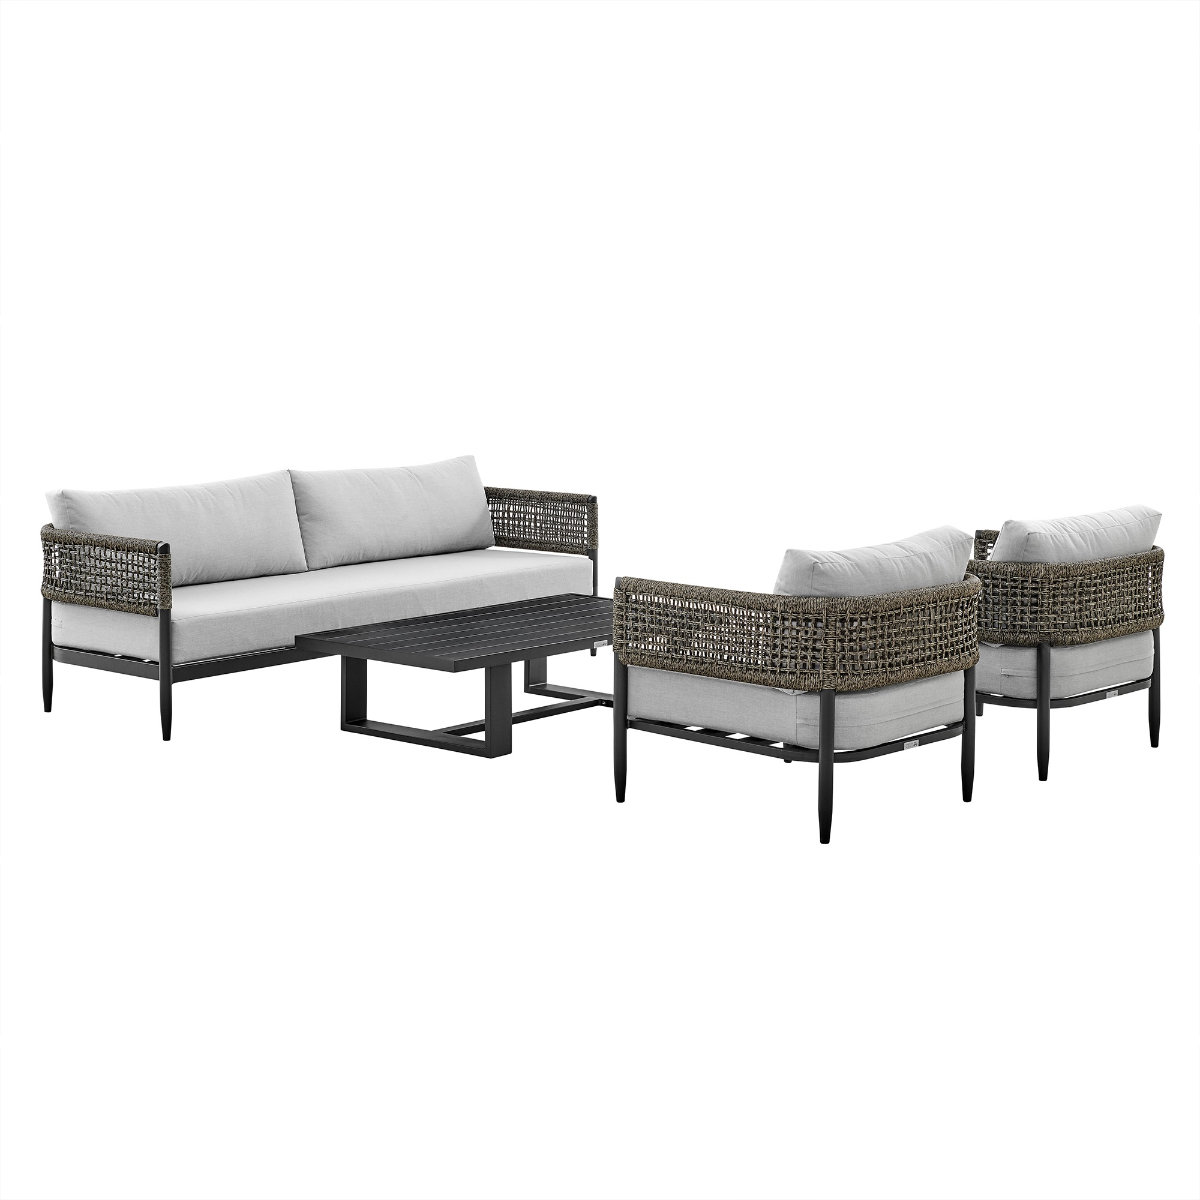 Joss & Main Scotia Polyethylene (PE) Wicker 5 - Person Seating Group with Cushions